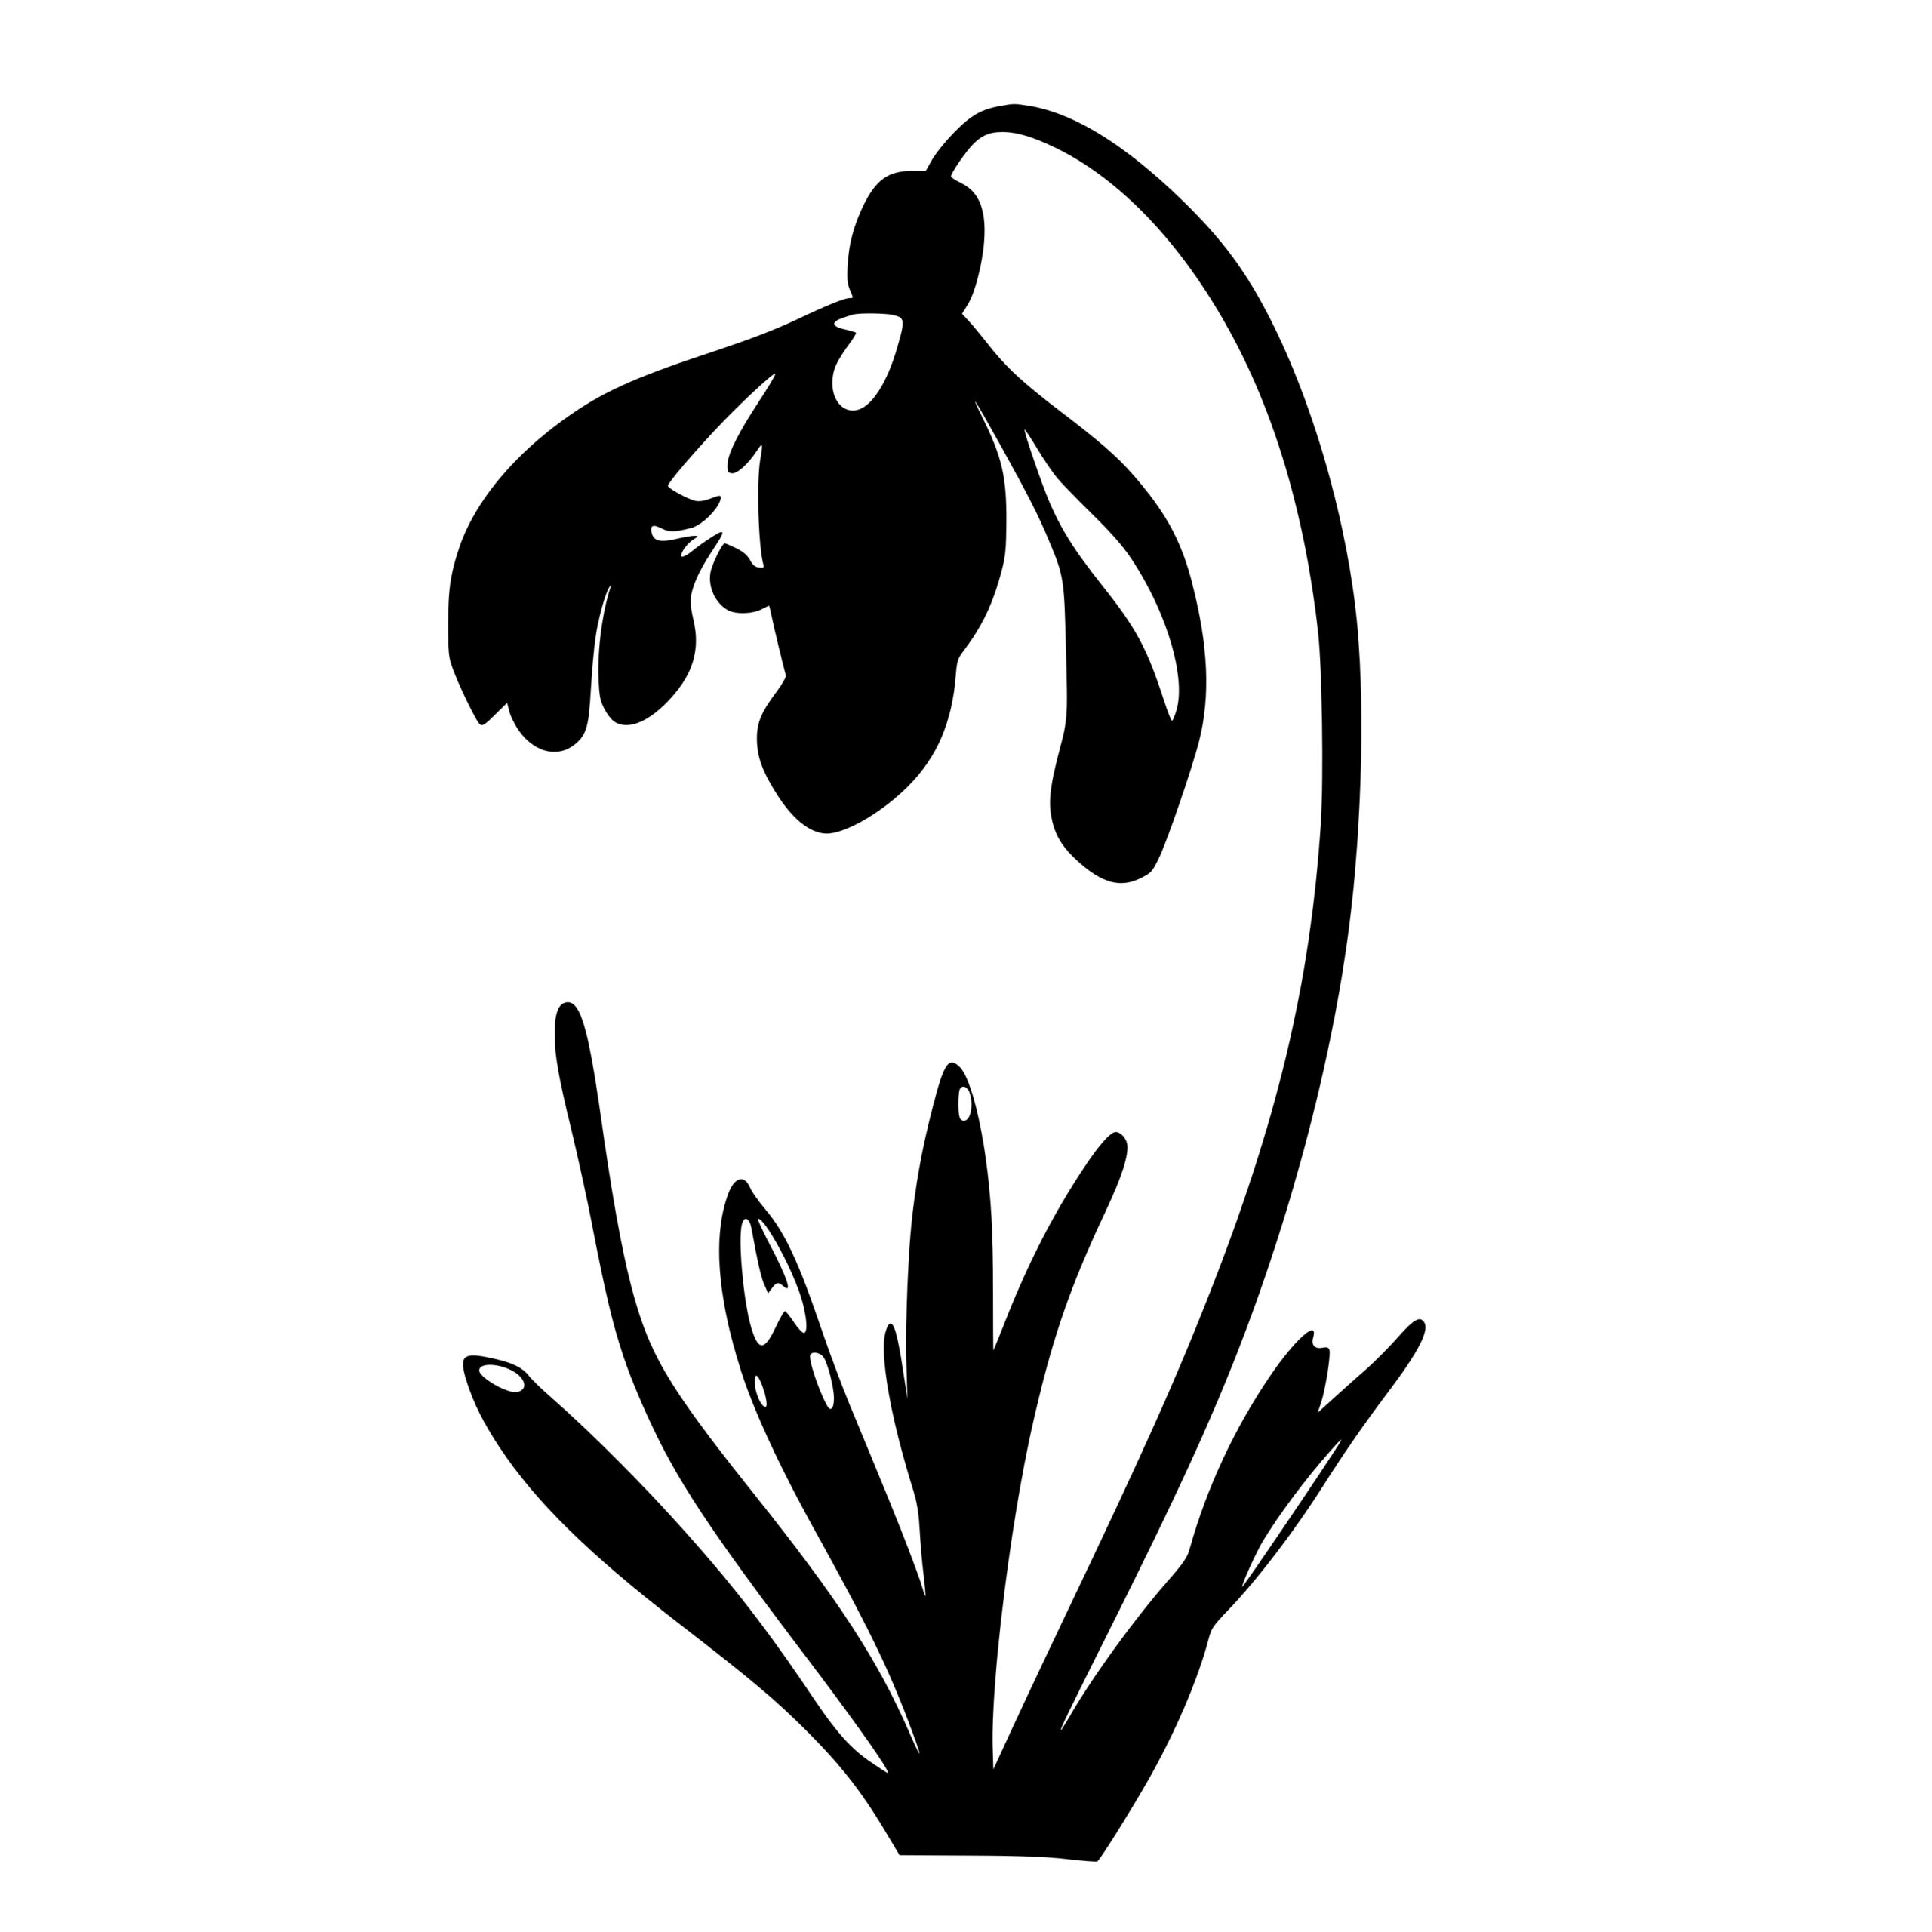 Snowdrop Plant SVG File for Cricut, Silhouette, and Laser Machines